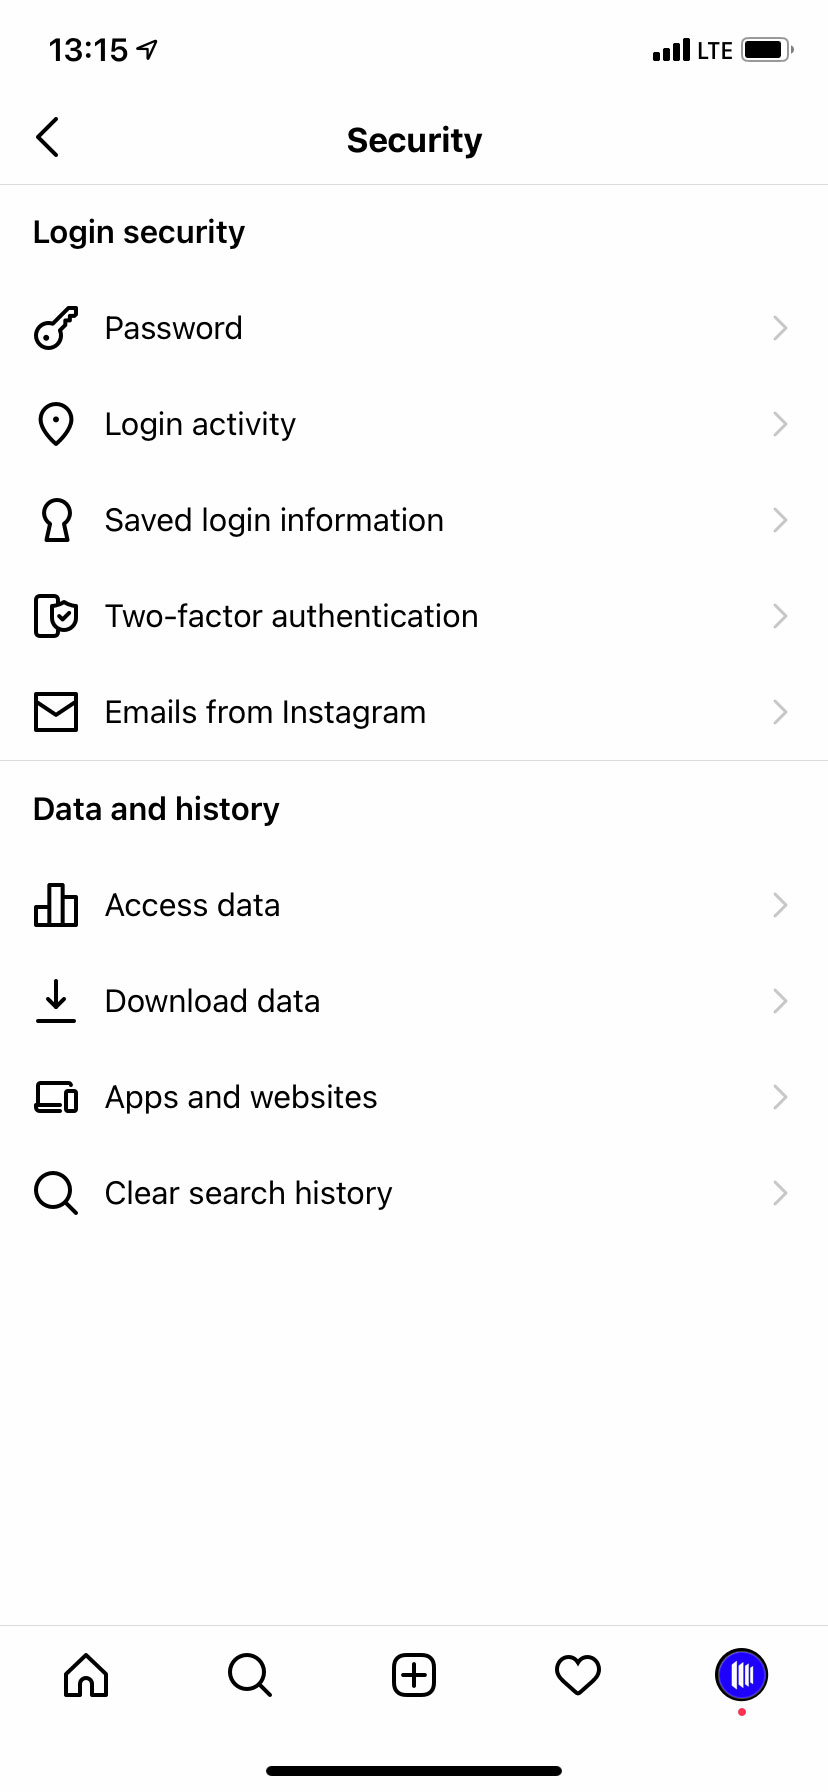 Download Data From Instagram